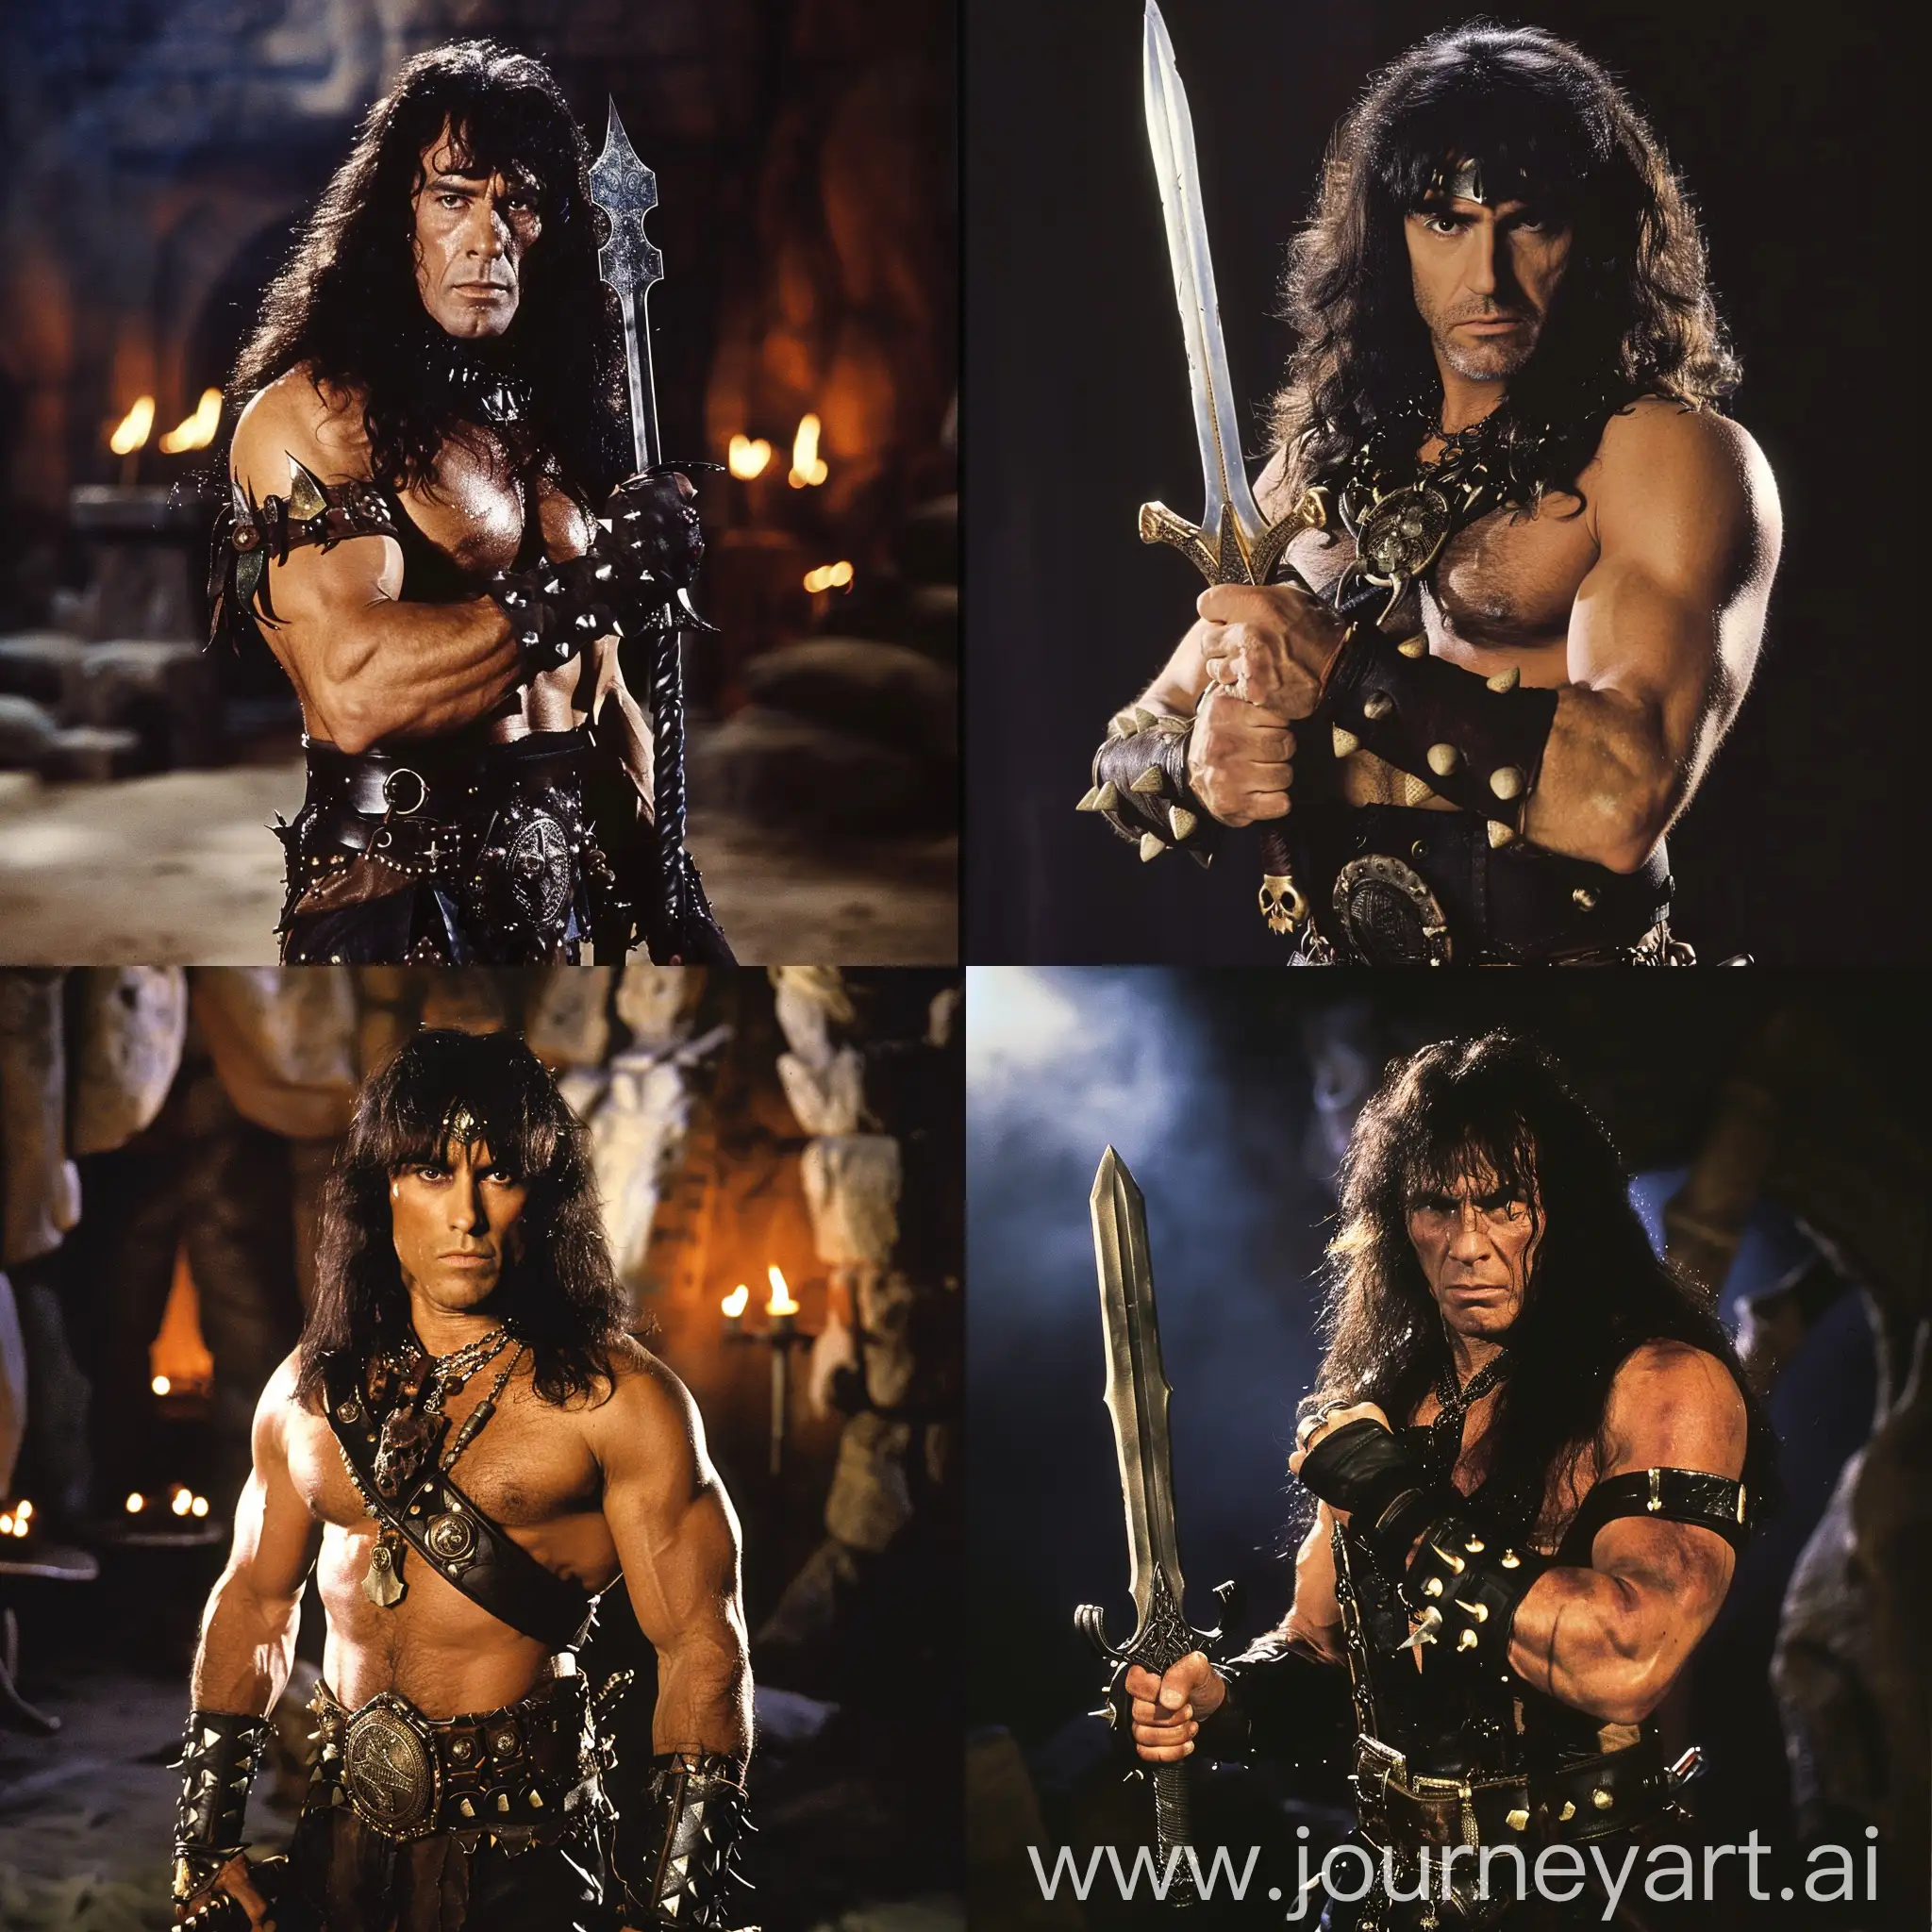 Conan-the-Barbarian-Inspired-by-Ronnie-James-Dio-in-Epic-Fantasy-Battle